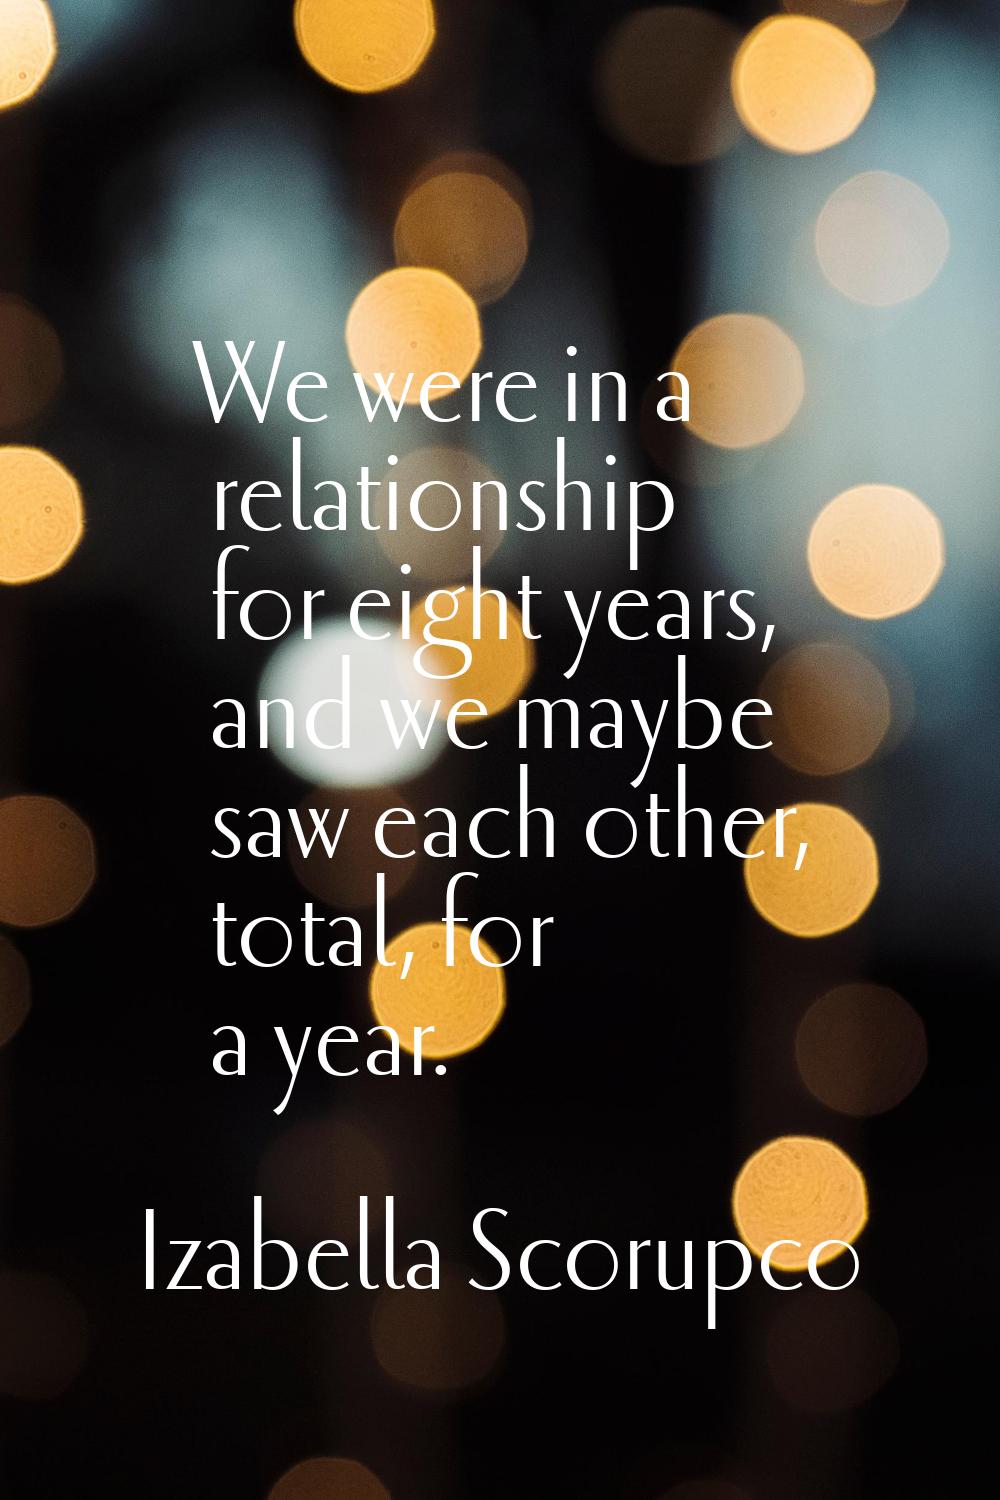 We were in a relationship for eight years, and we maybe saw each other, total, for a year.